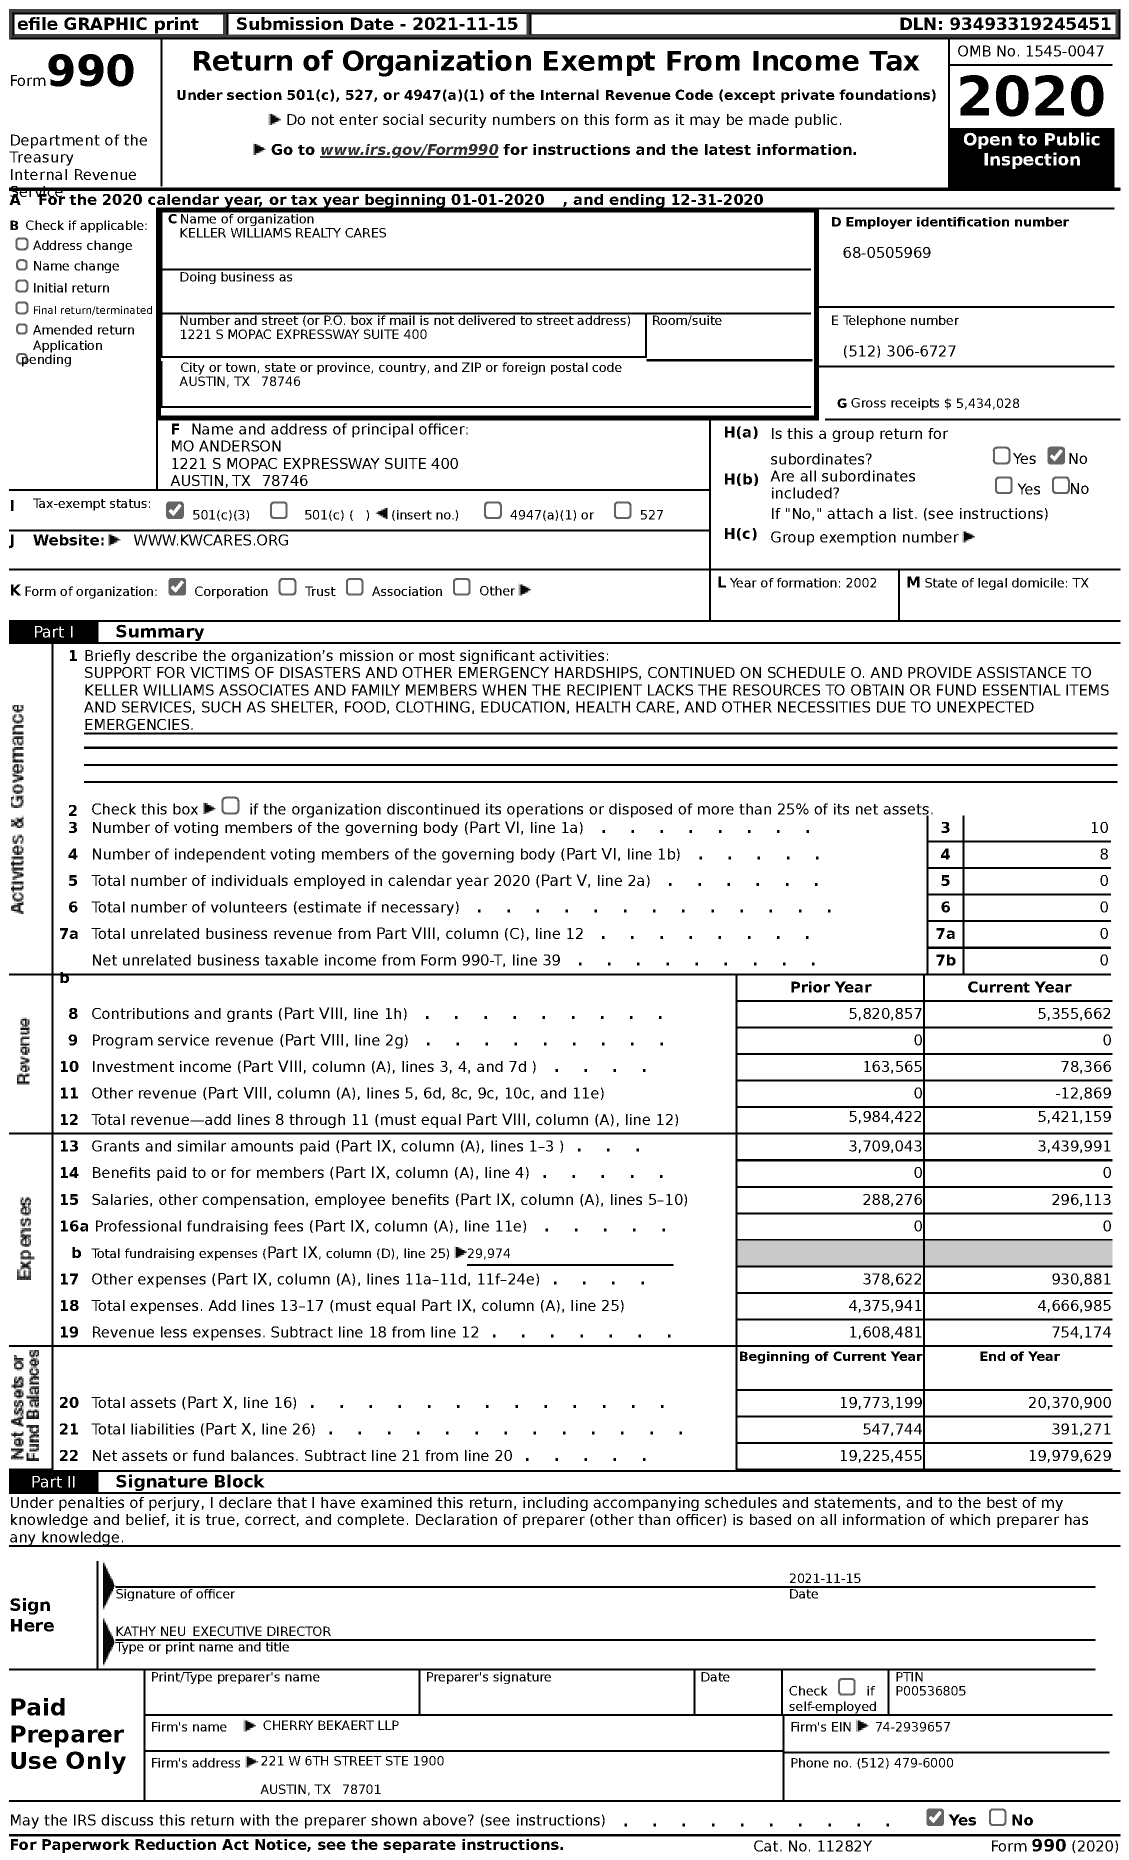 Image of first page of 2020 Form 990 for Keller Williams Realty Cares